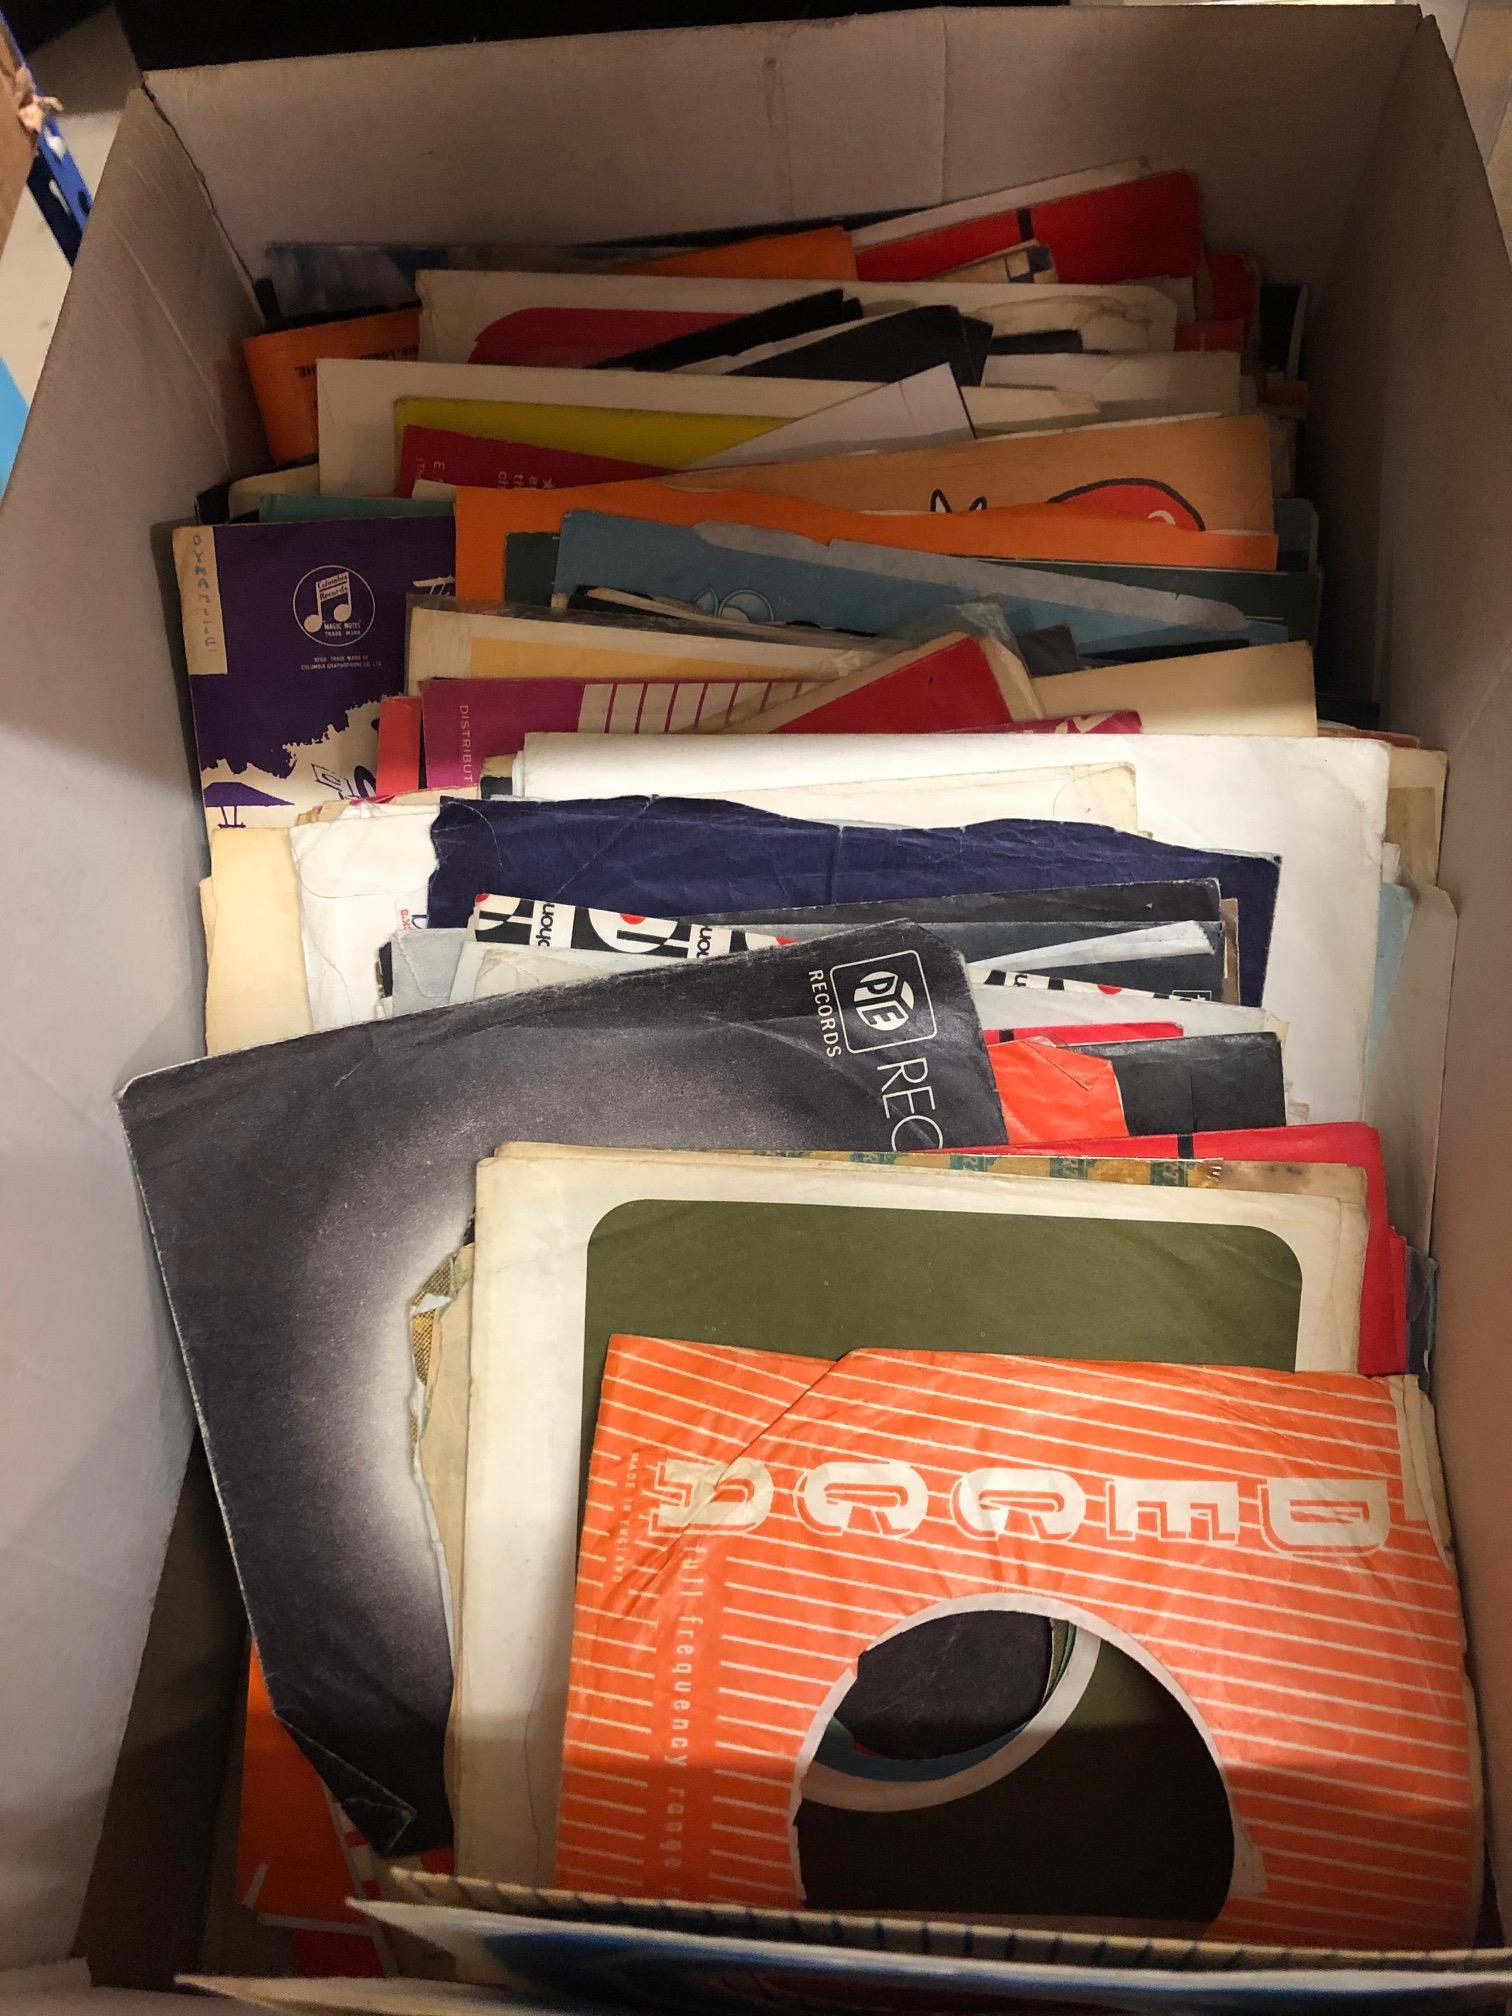 Vinyl - Collection of 7" Company sleeves.